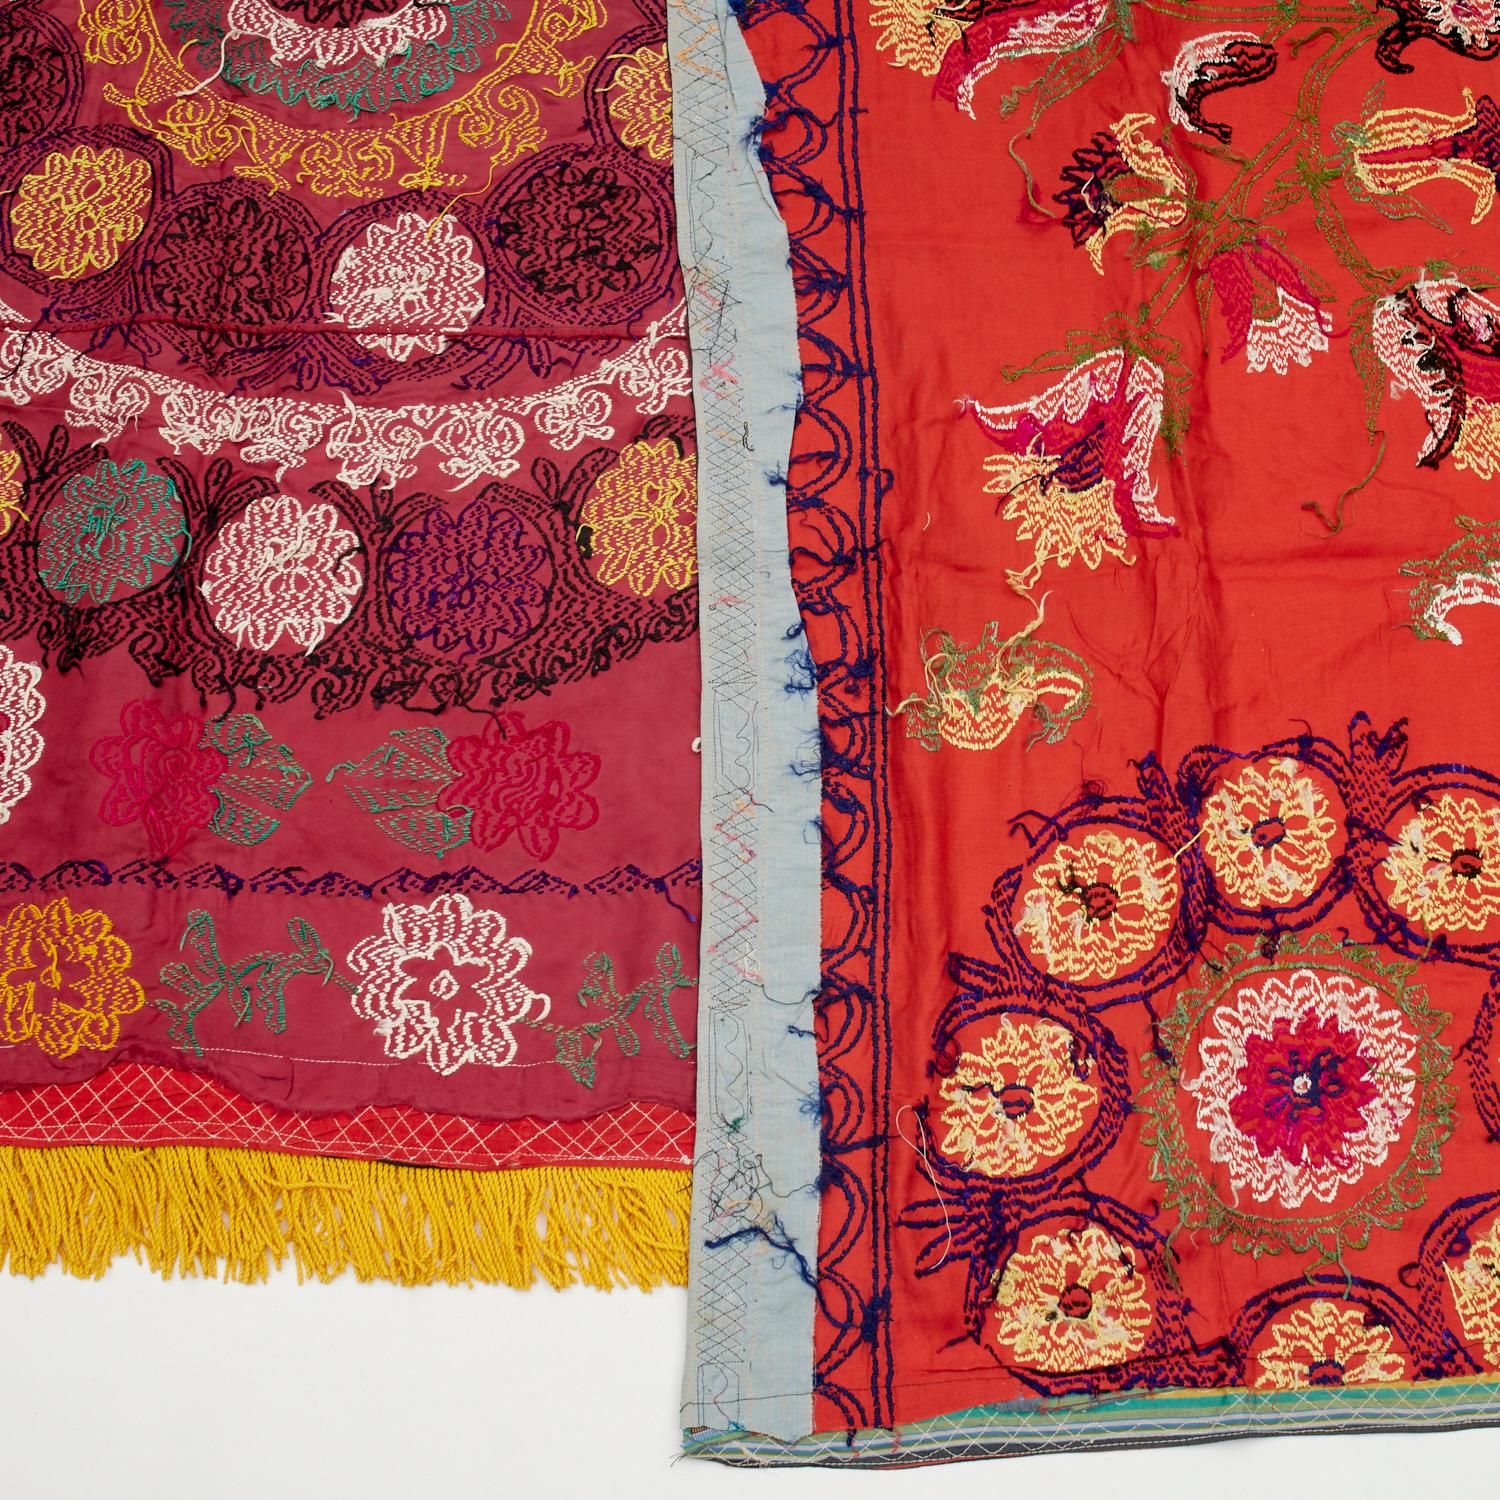 Two Vintage Embroidered Suzani Style Textiles from Central Asia - Ex Lewis Stein For Sale 3